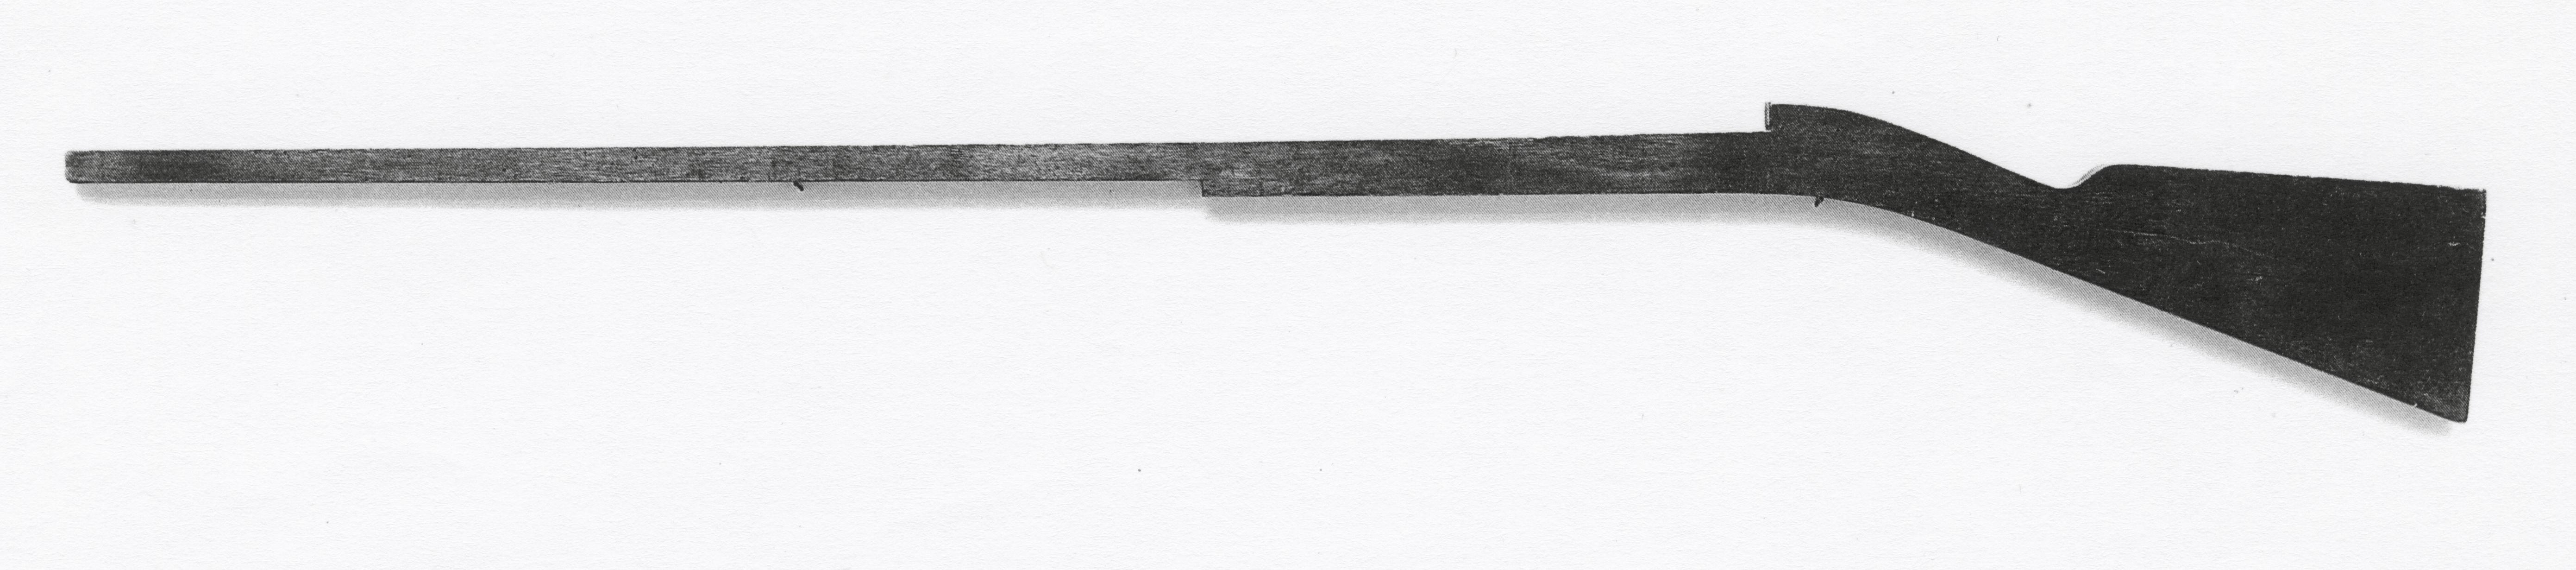 Black and white photograph of a gunstock pattern.